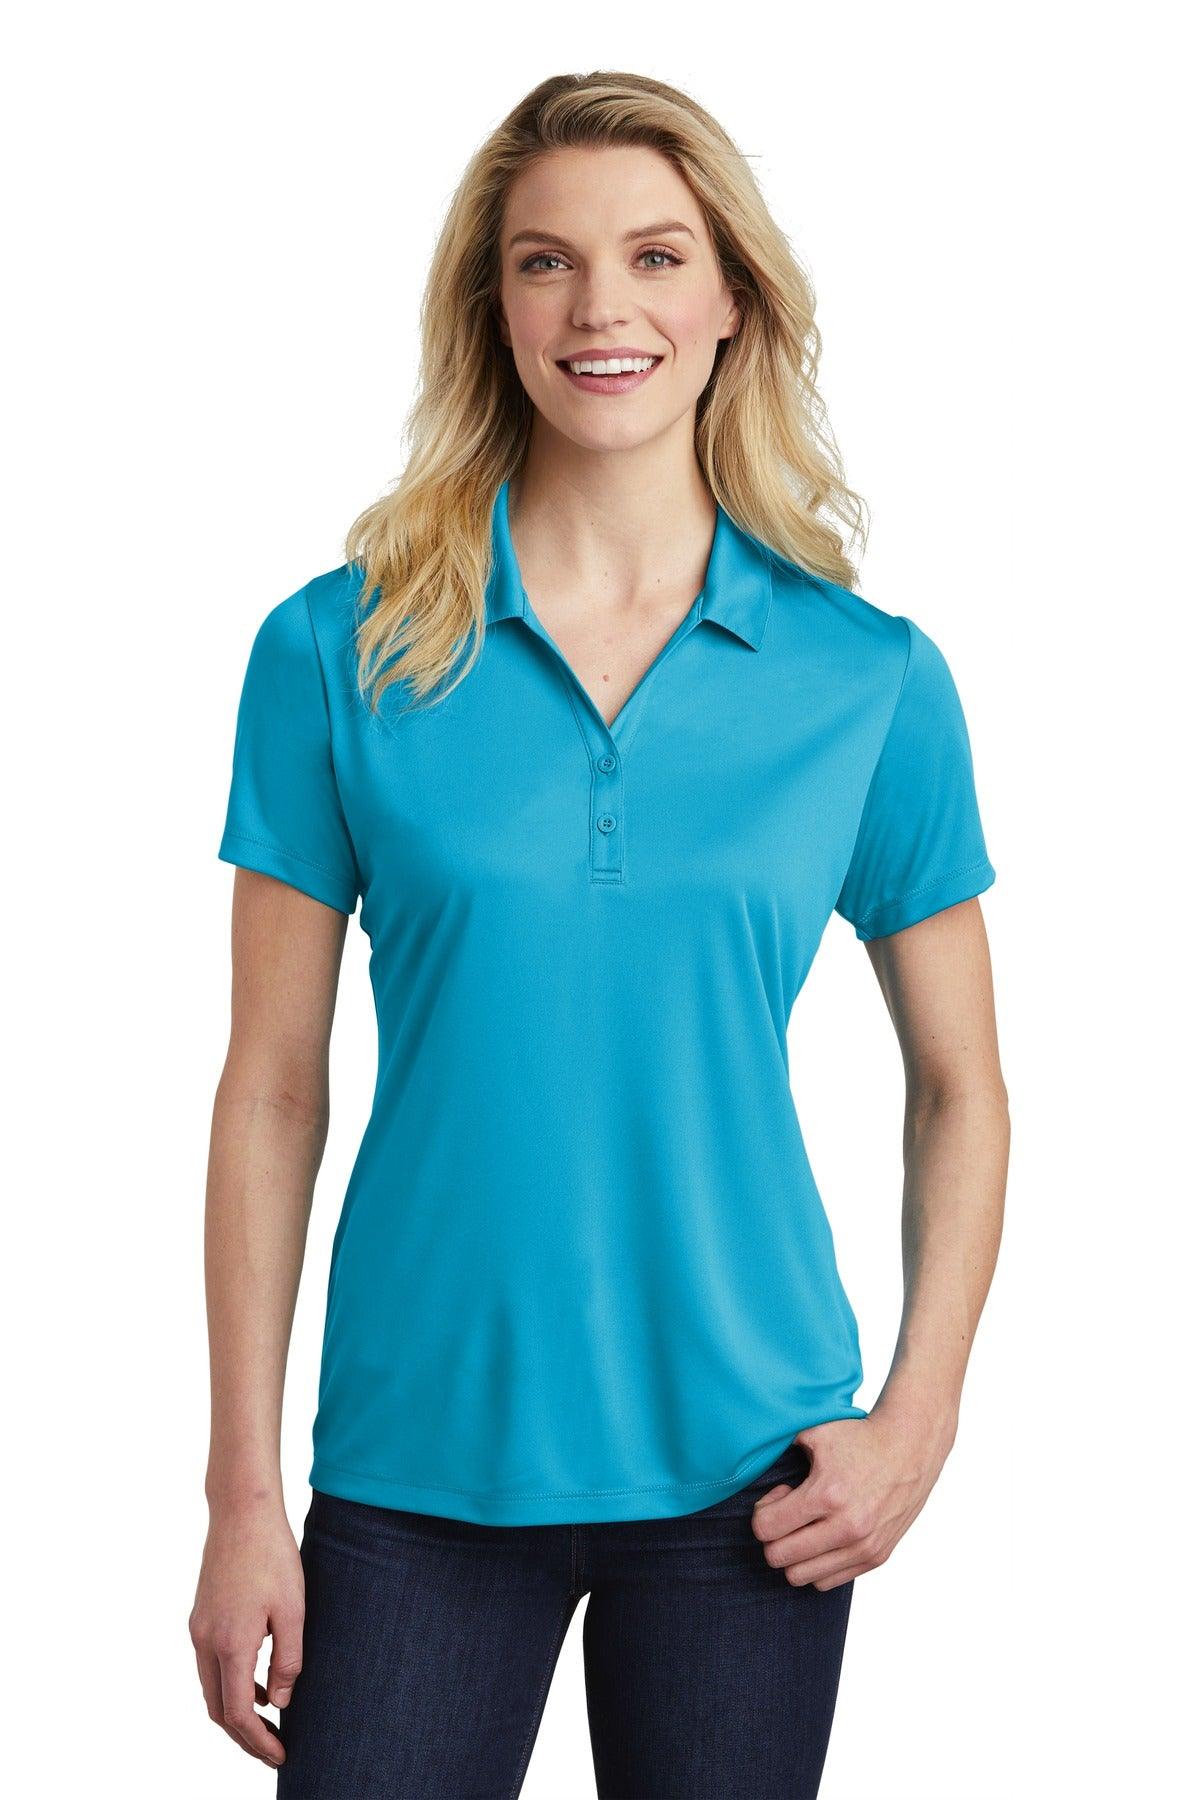 Sport-Tek Ladies PosiCharge Competitor Polo. LST550 - Dresses Max